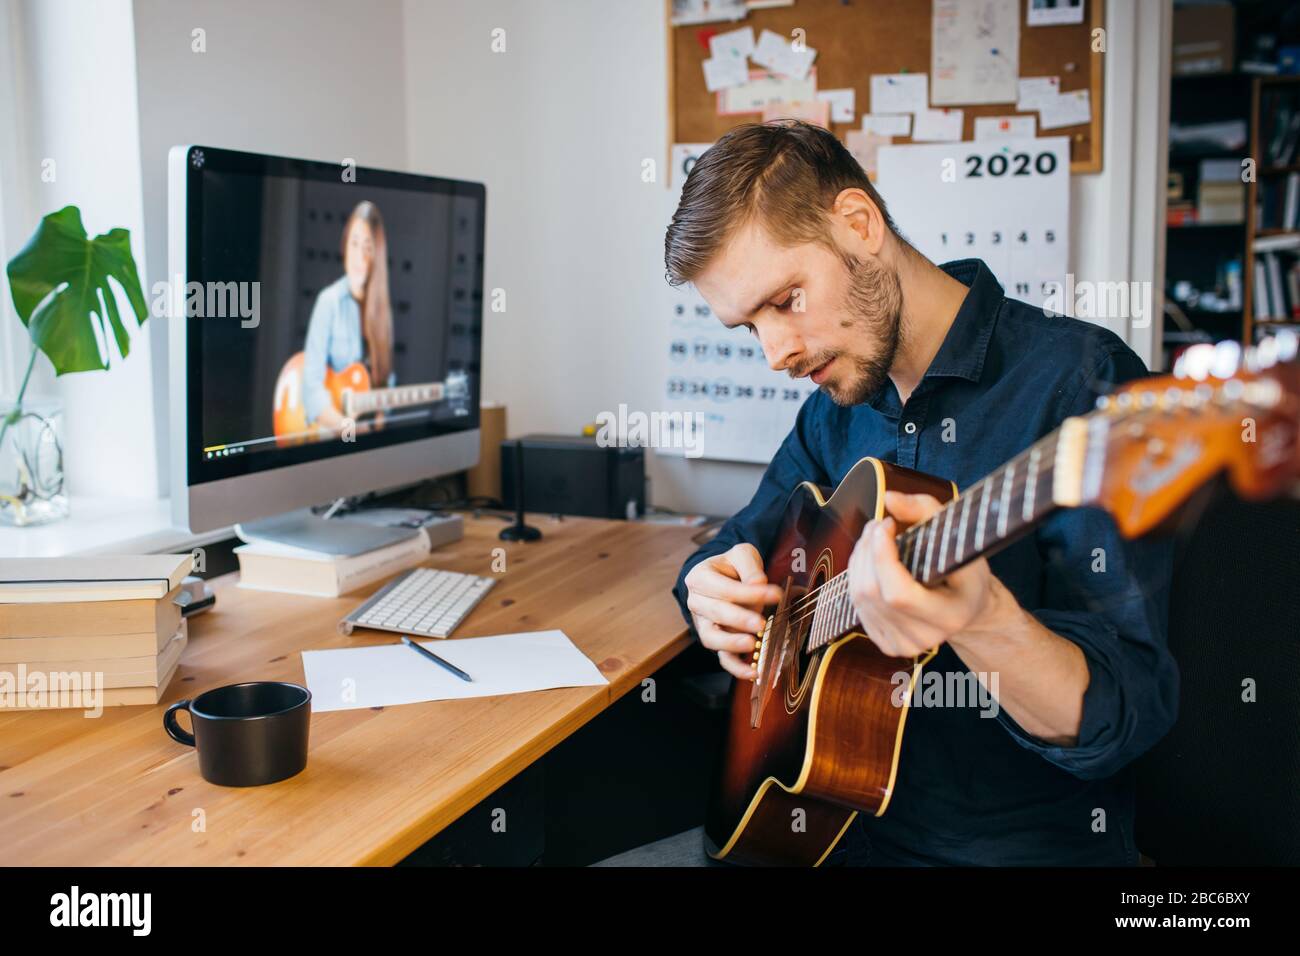 Man learning how to play guitar from online tutorial. Man playing acoustic guitar. Stay at home concept during Coronavirus pandemic. Stock Photo